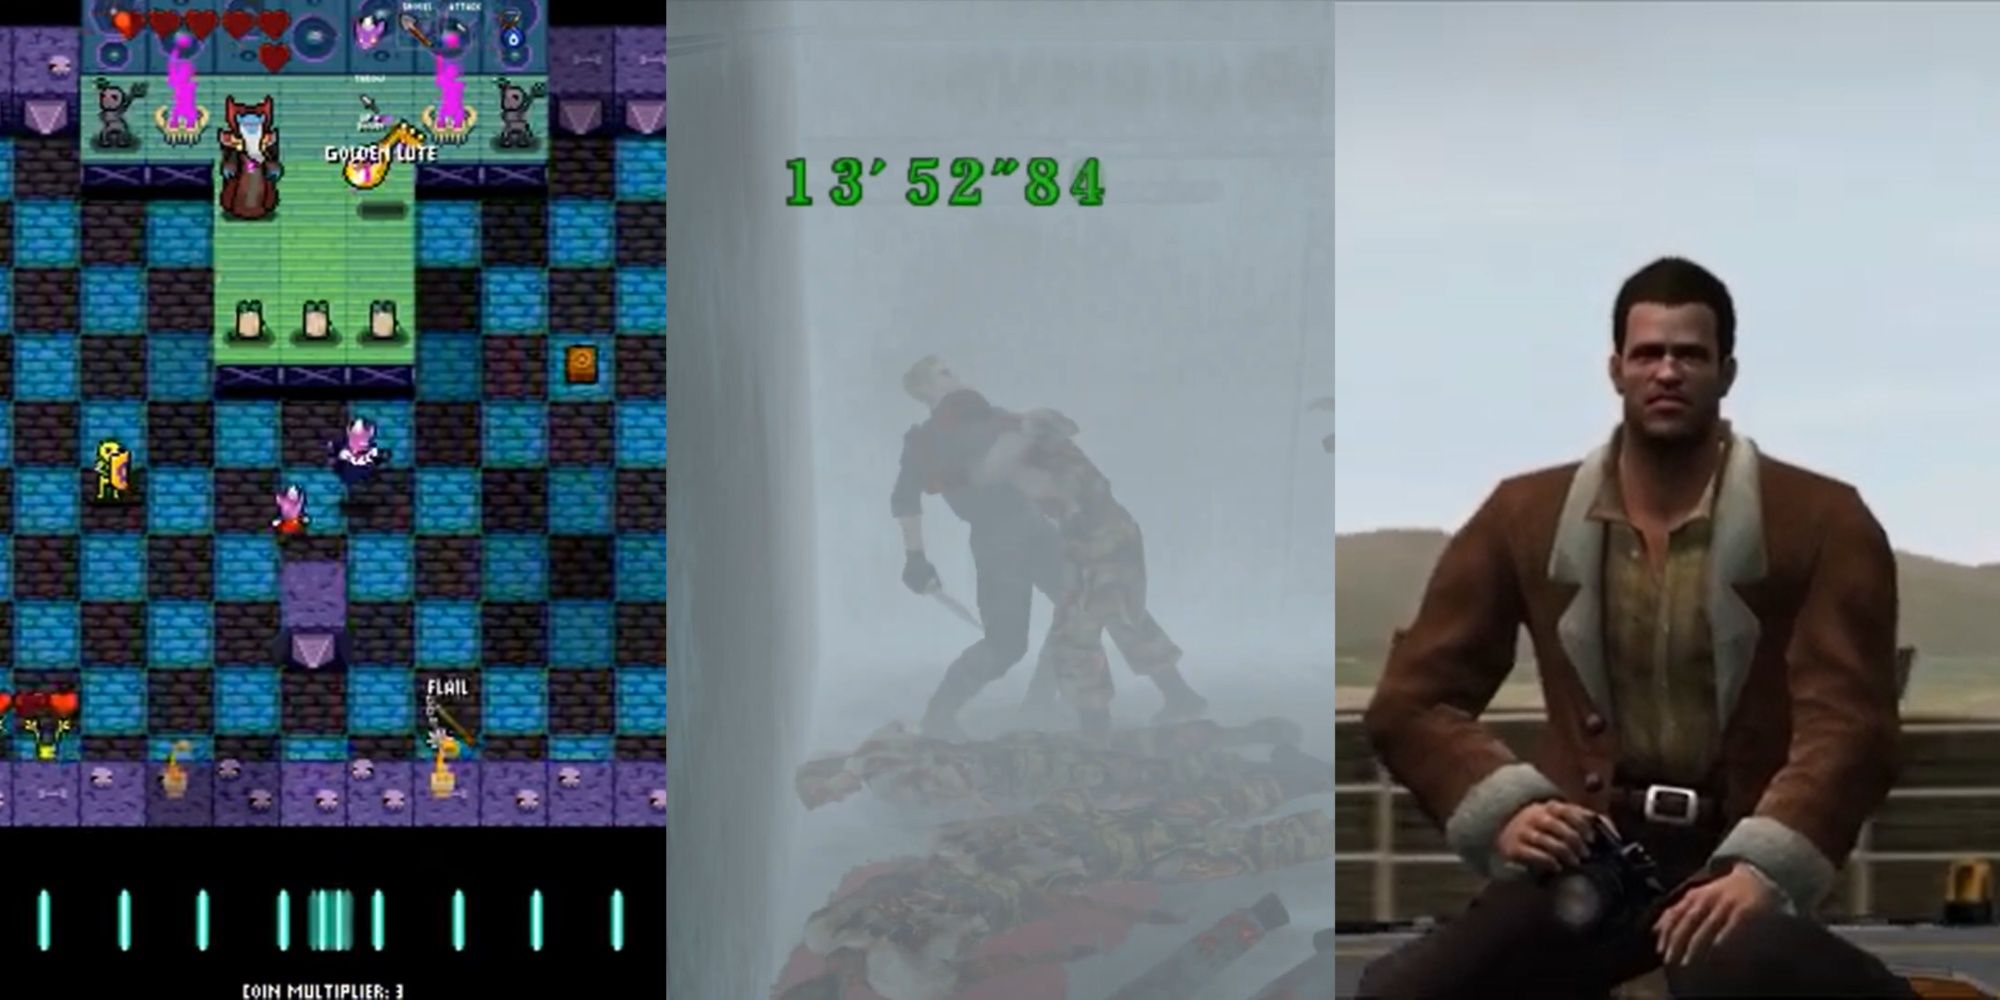 Three images side by side from left to right: Crypt of the NecroDancer final boss battle, Albert Wesker fighting a zombie, Frank West in brown coat